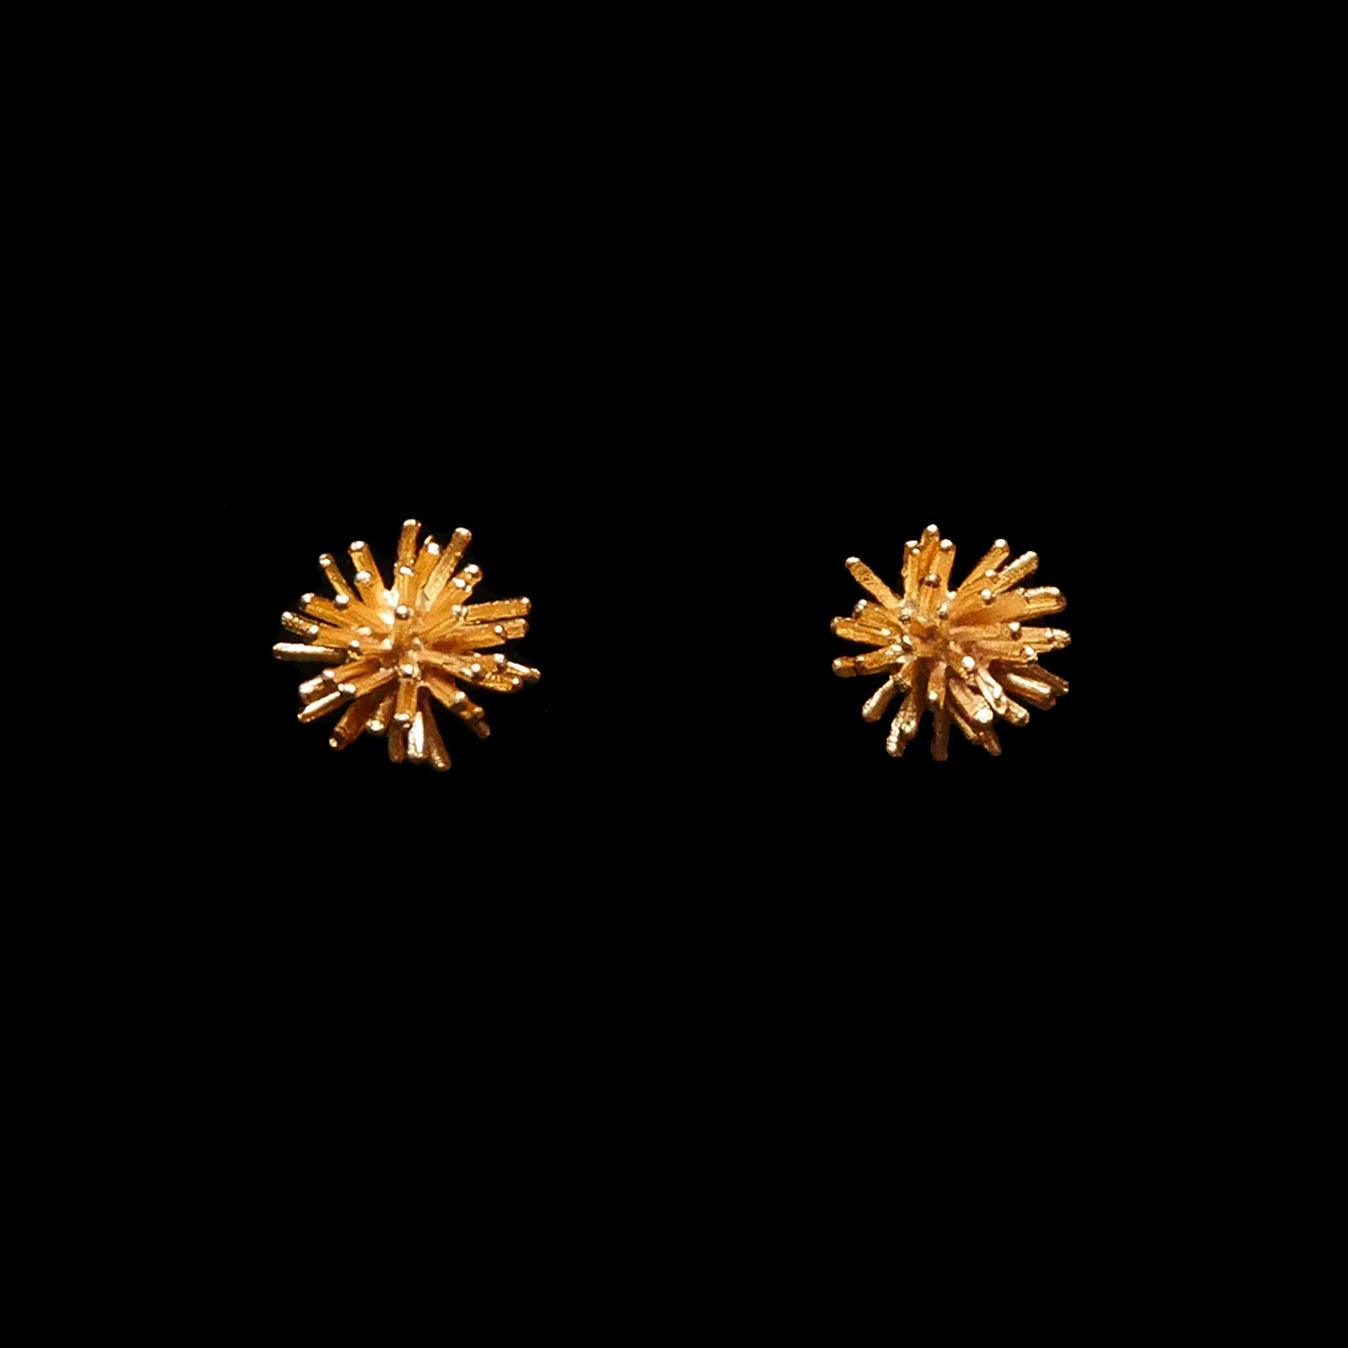 Gone To Seed Earrings - Large Stud Gold - Michael Michaud Jewellery